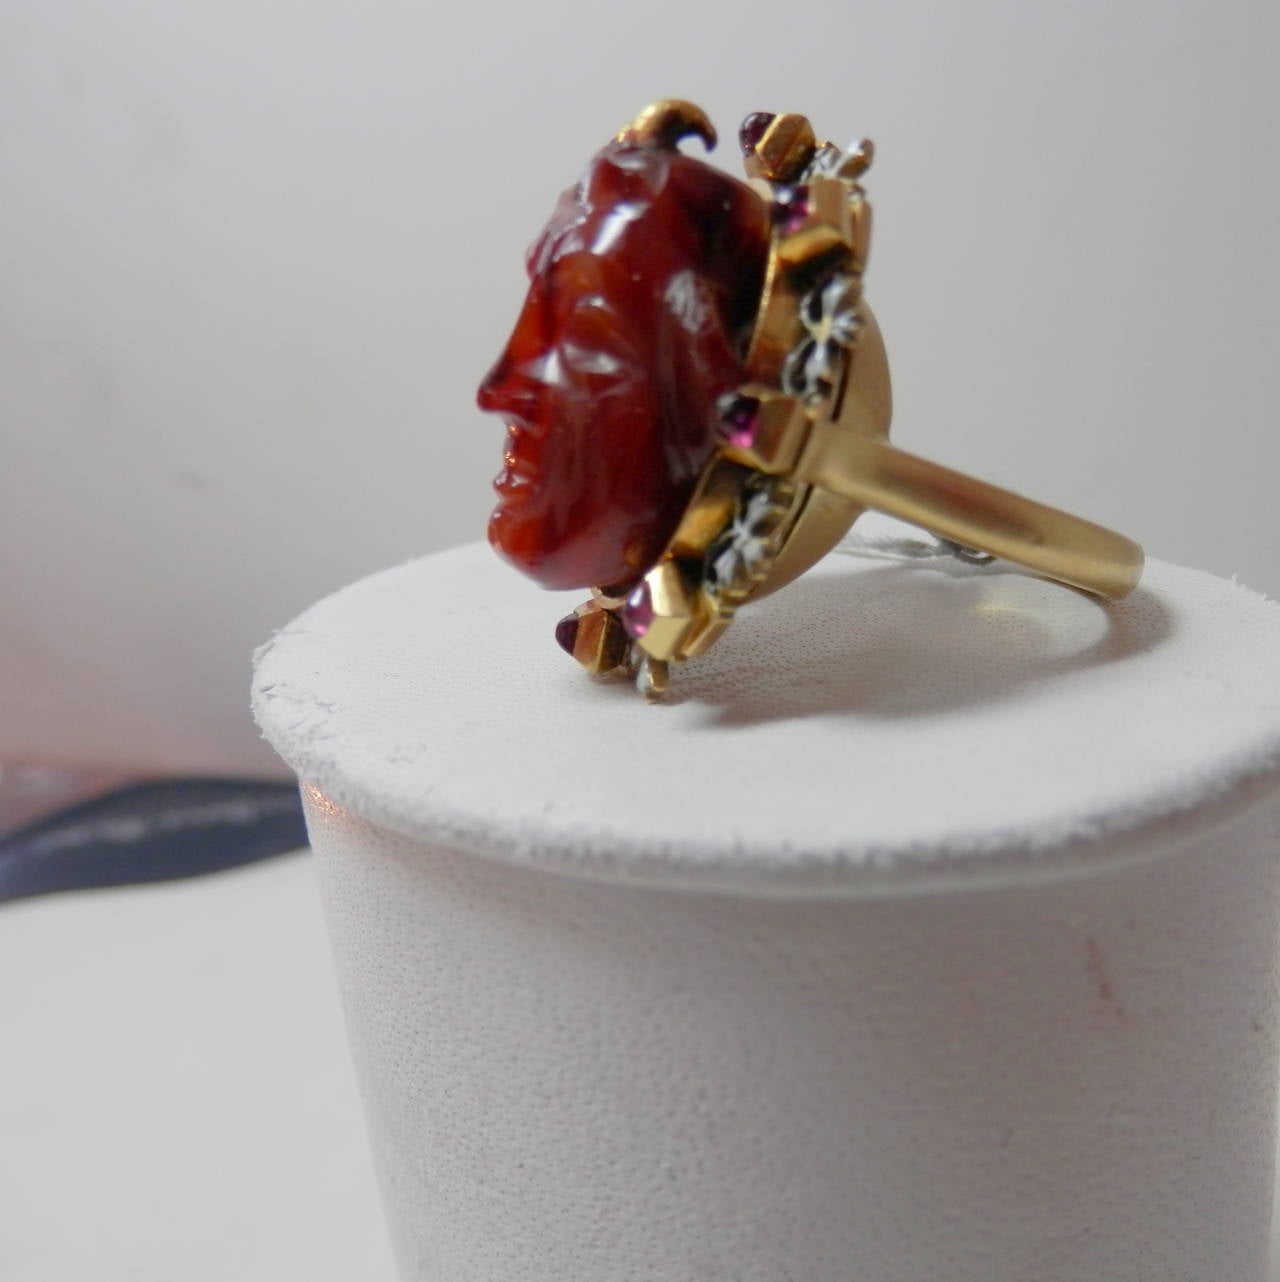 Holbeinesque Antique Ring of a Fine Carving Surrounded with Rubies and Enamel